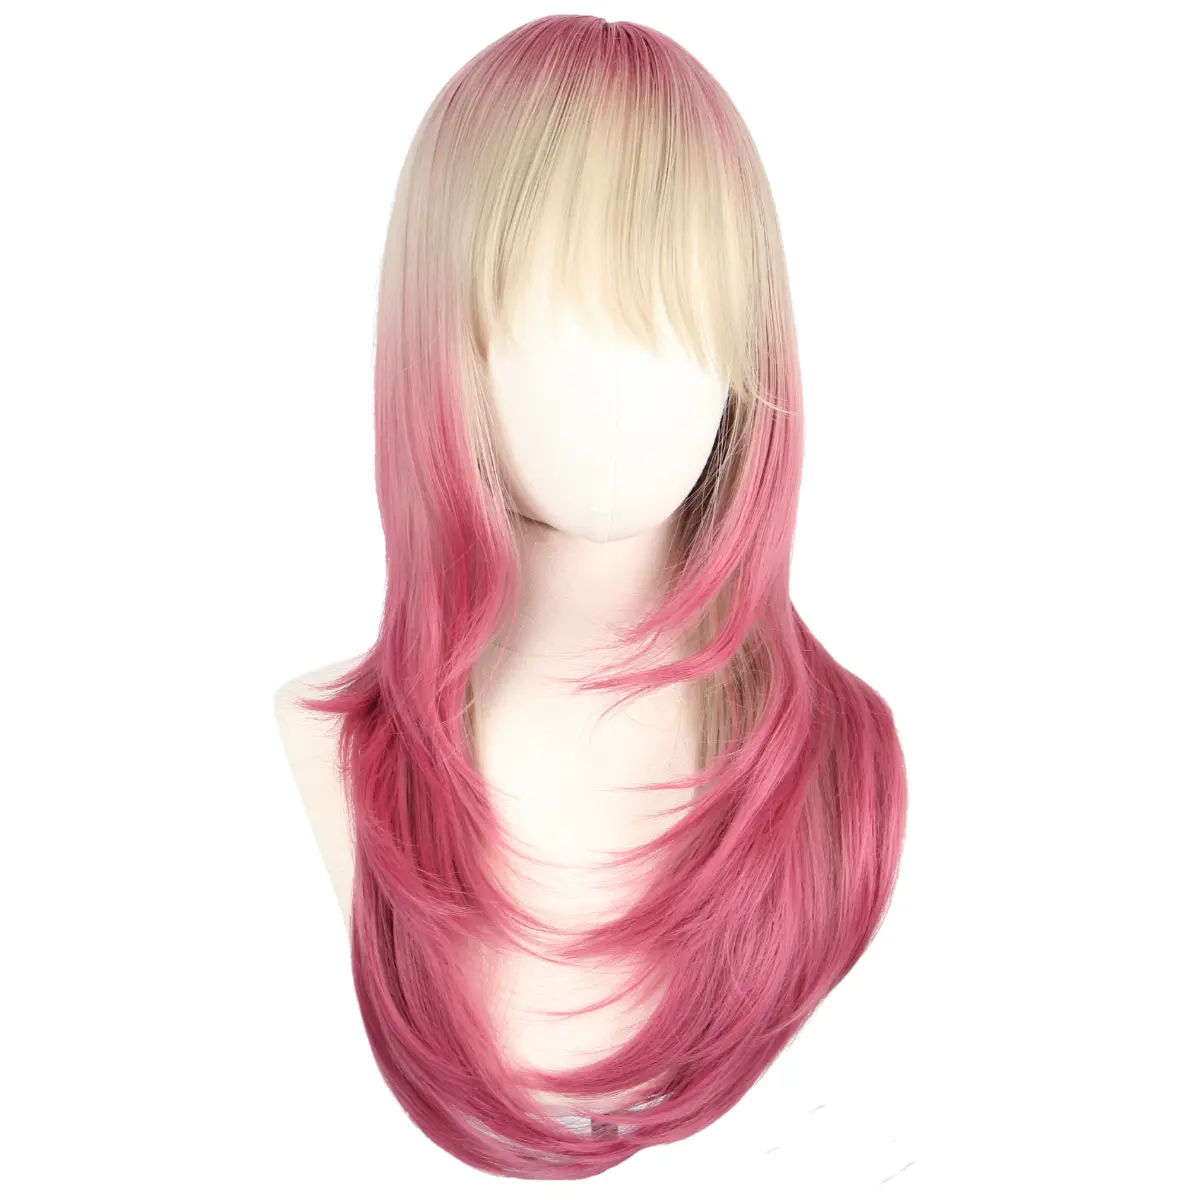 Anxin Anime Wig for Cosplay Women Lolita Costume Wig Pink Long Synthetic Wig